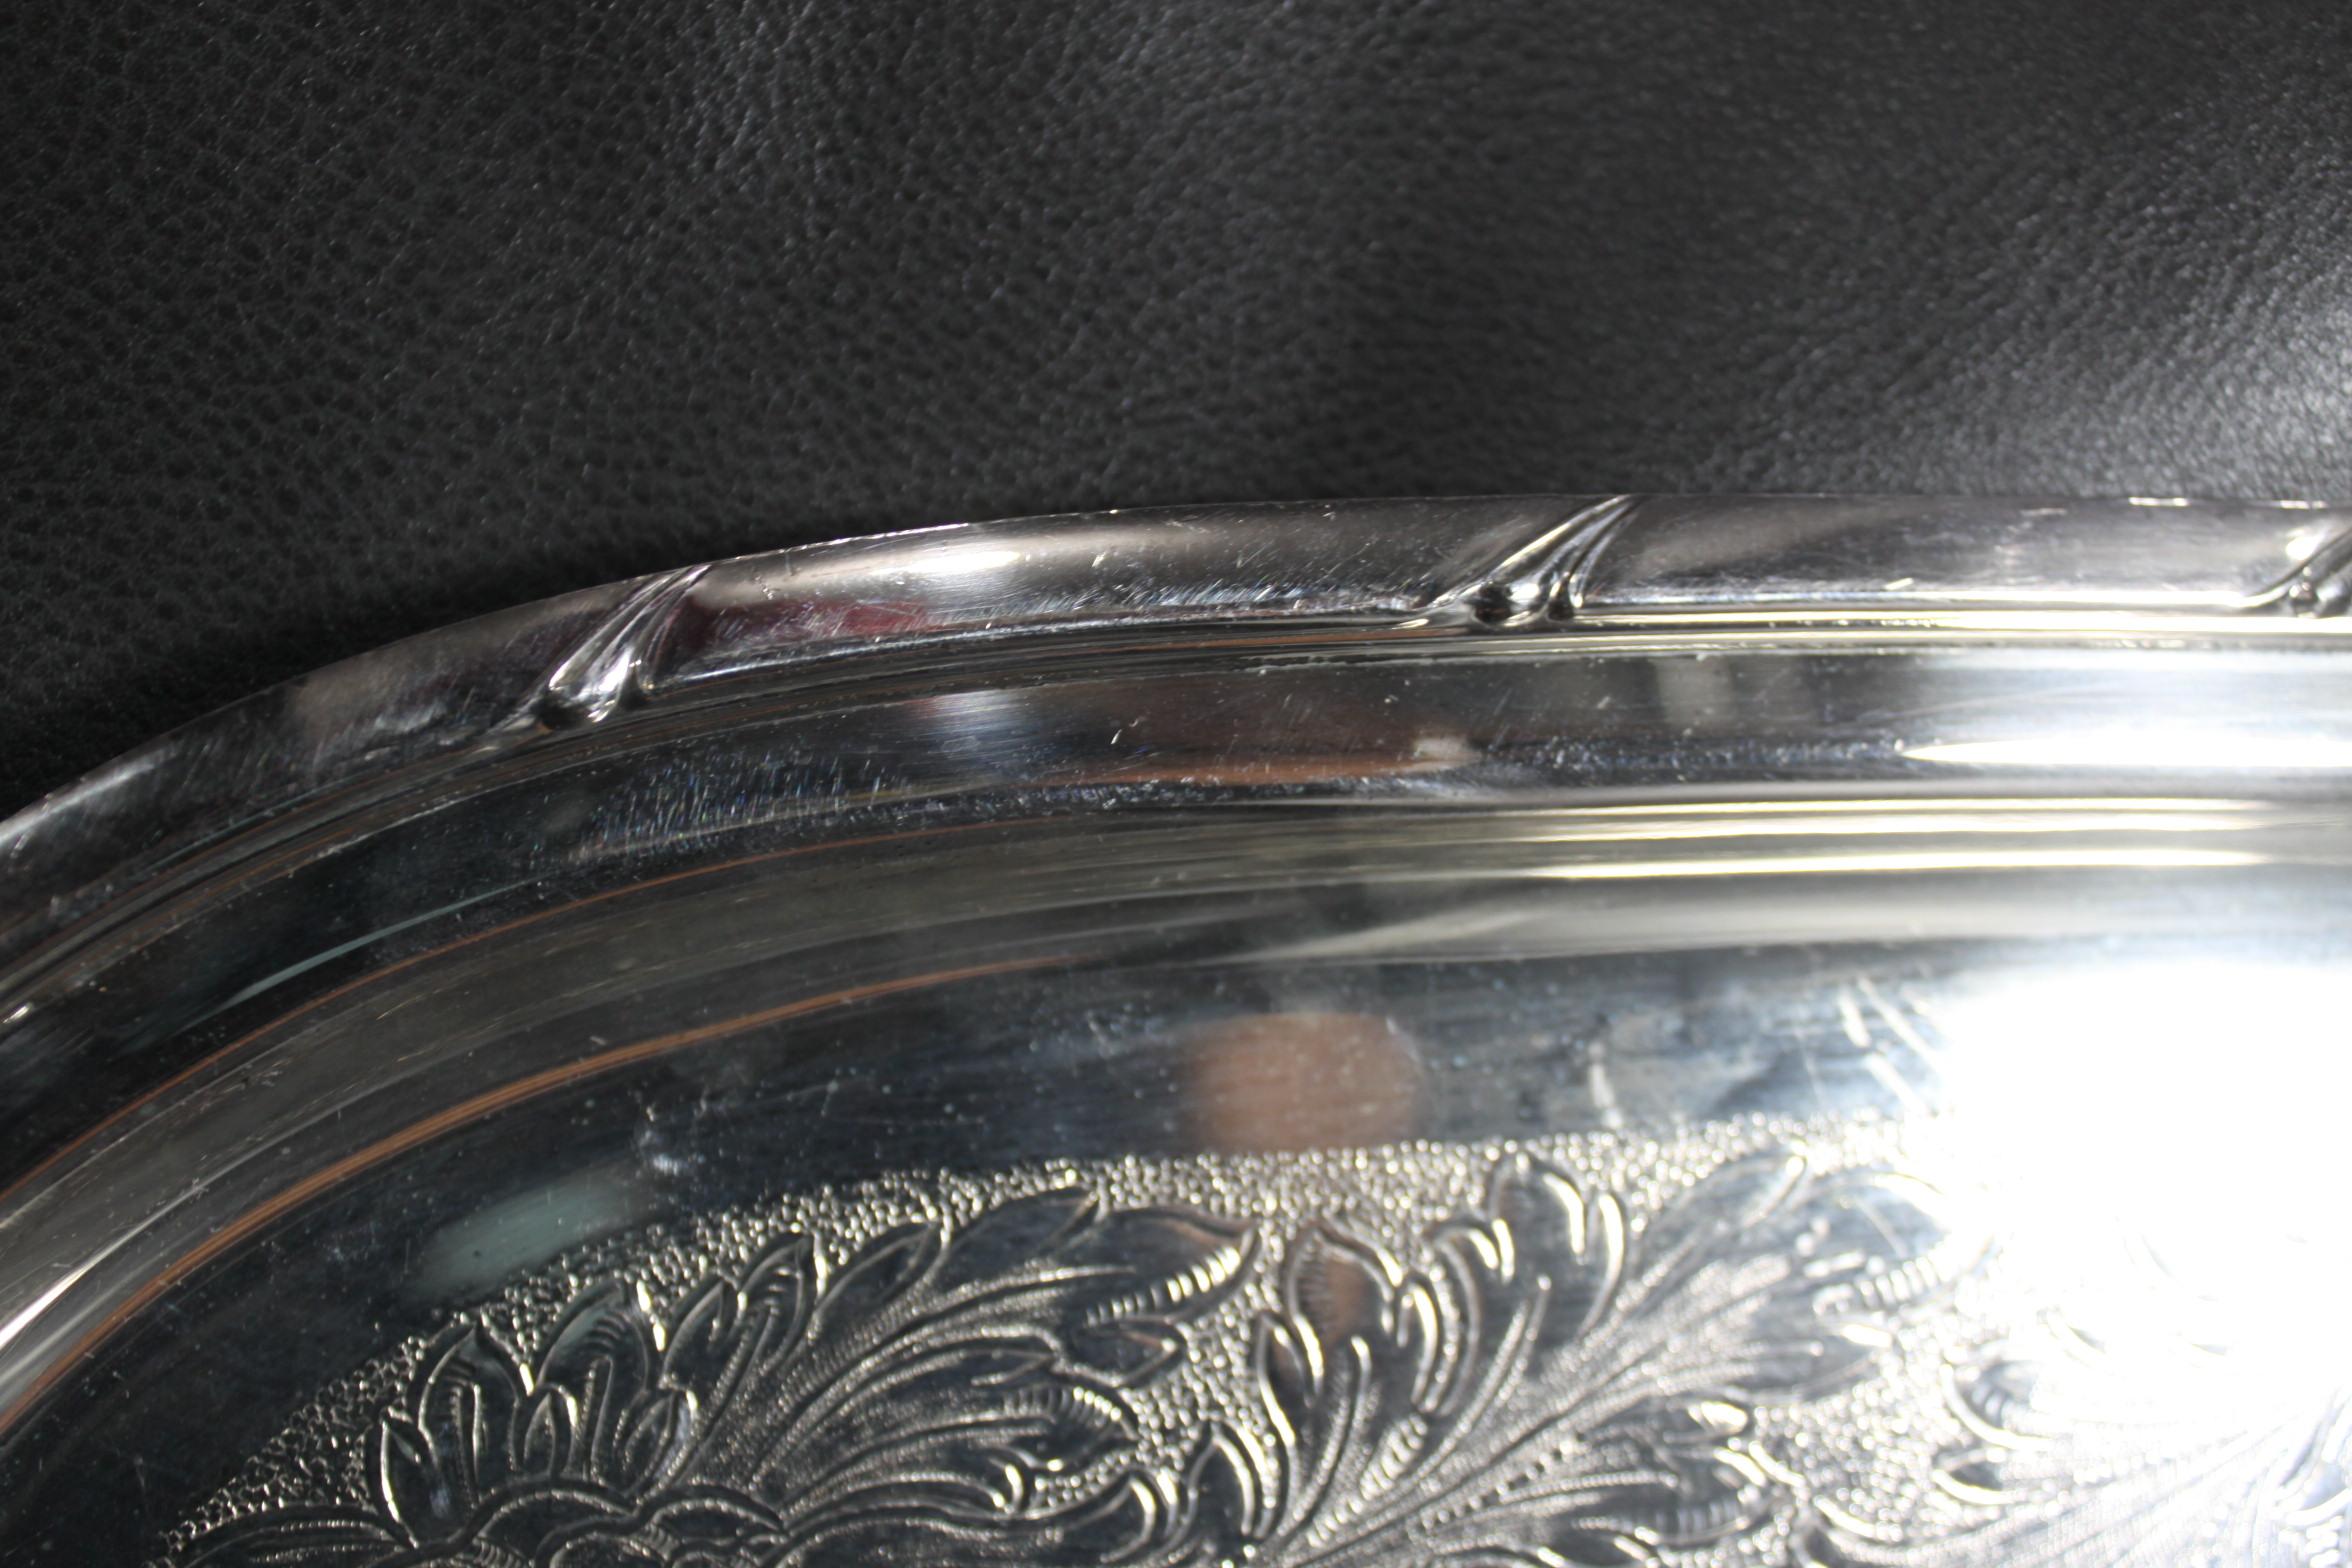 Rogers Antique Styled Silver Plated Engraved Serving Tray In Good Condition For Sale In Hamilton, Ontario